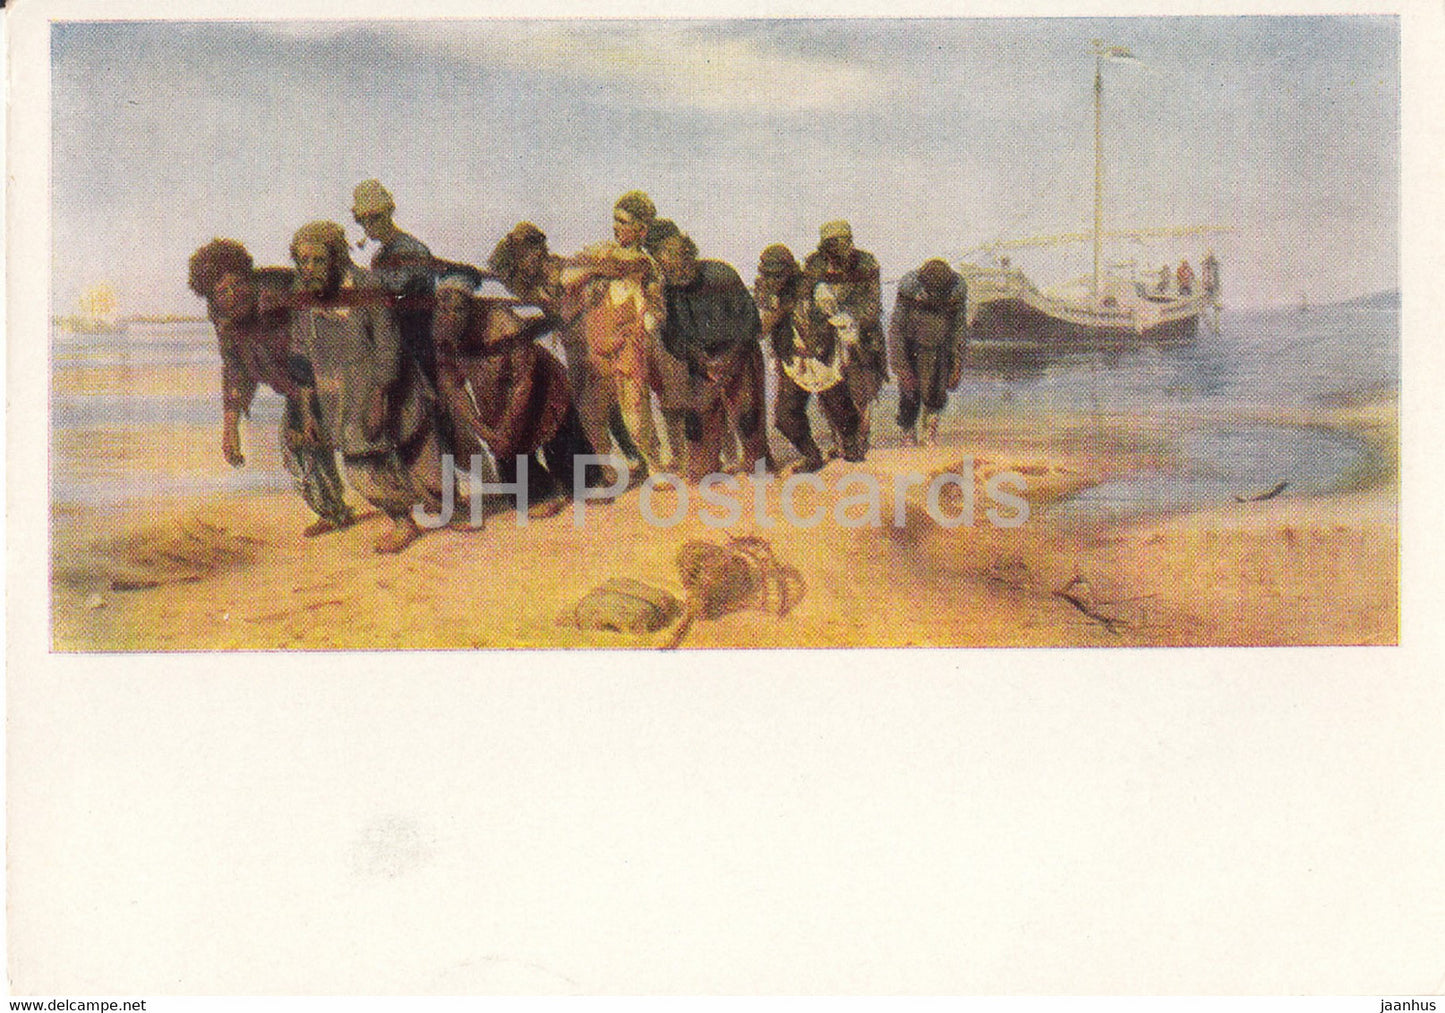 painting by I. Repin - Bargemen on the Volga - Russian art - 1966 - Russia USSR - unused - JH Postcards